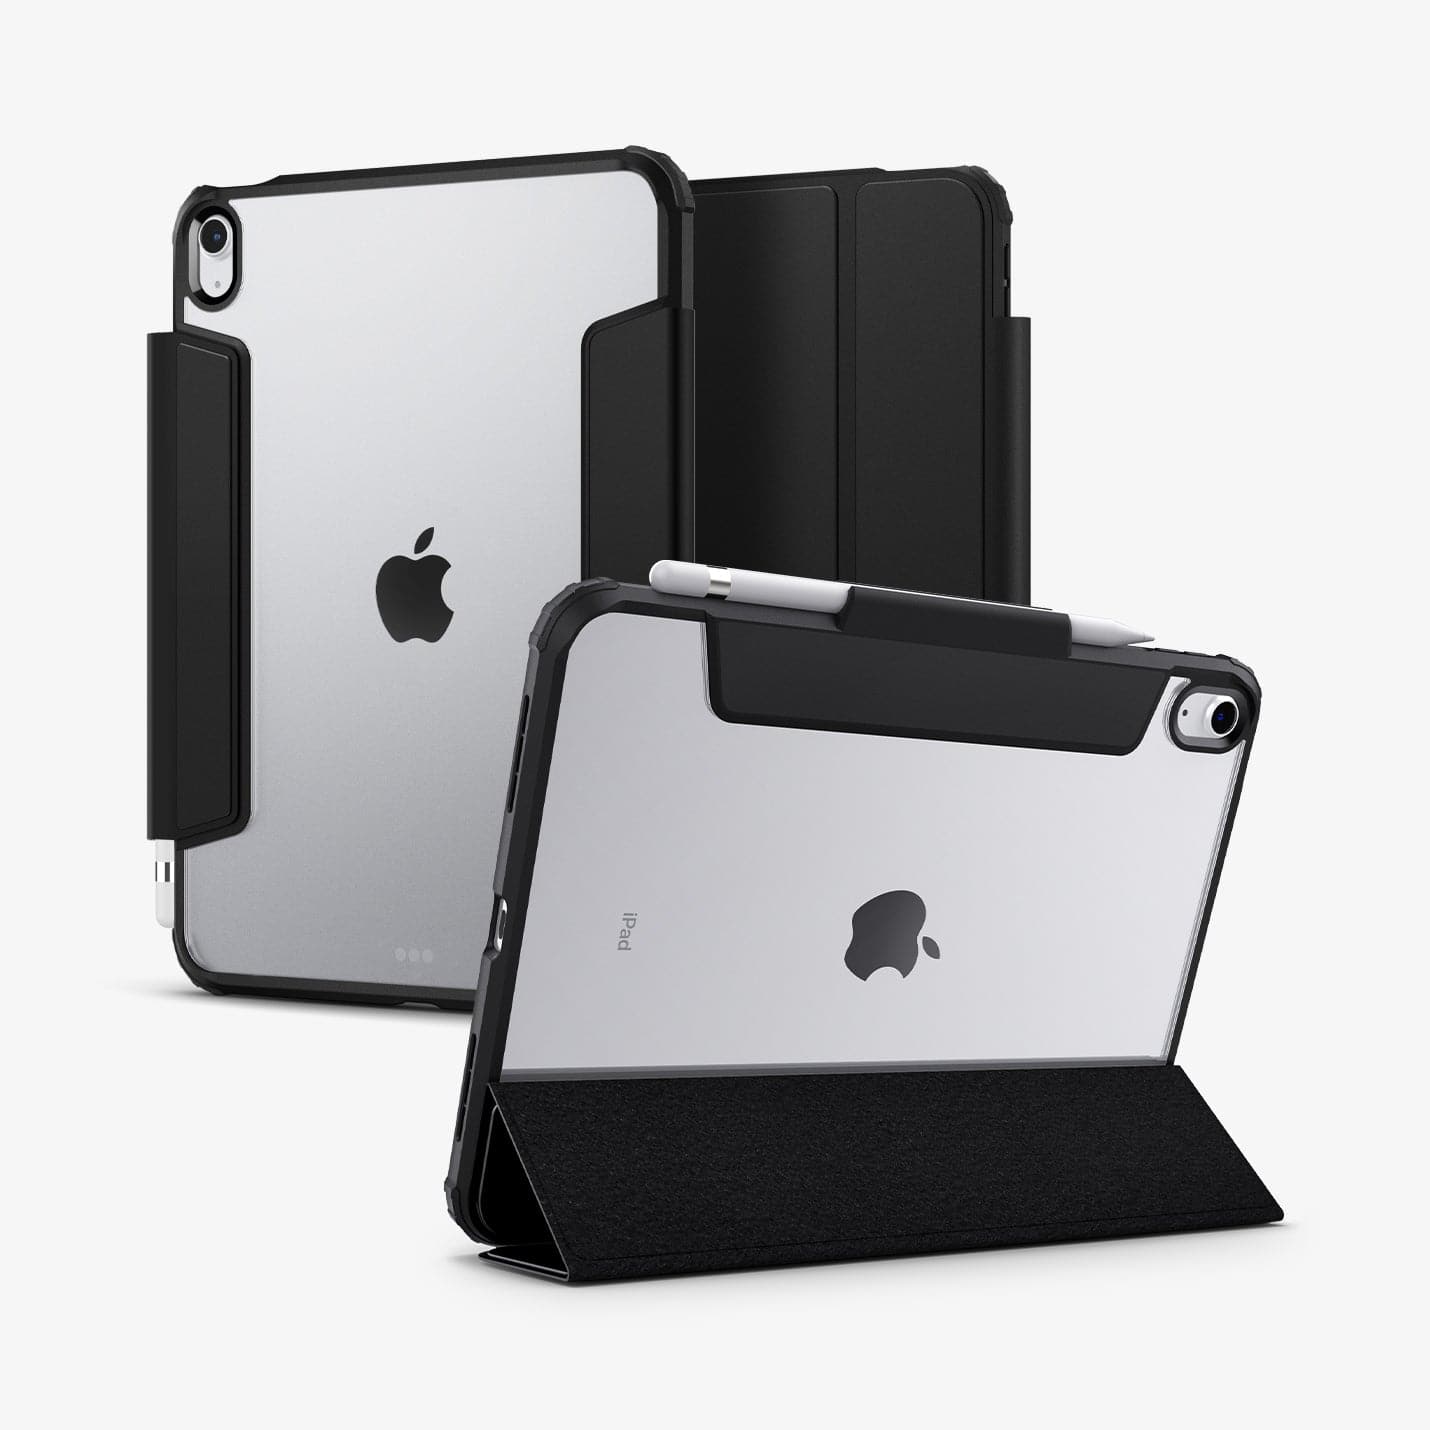 ACS05416 - iPad 10.9" Case Ultra Hybrid Pro in black showing the back, front and device propped up by built in kickstand